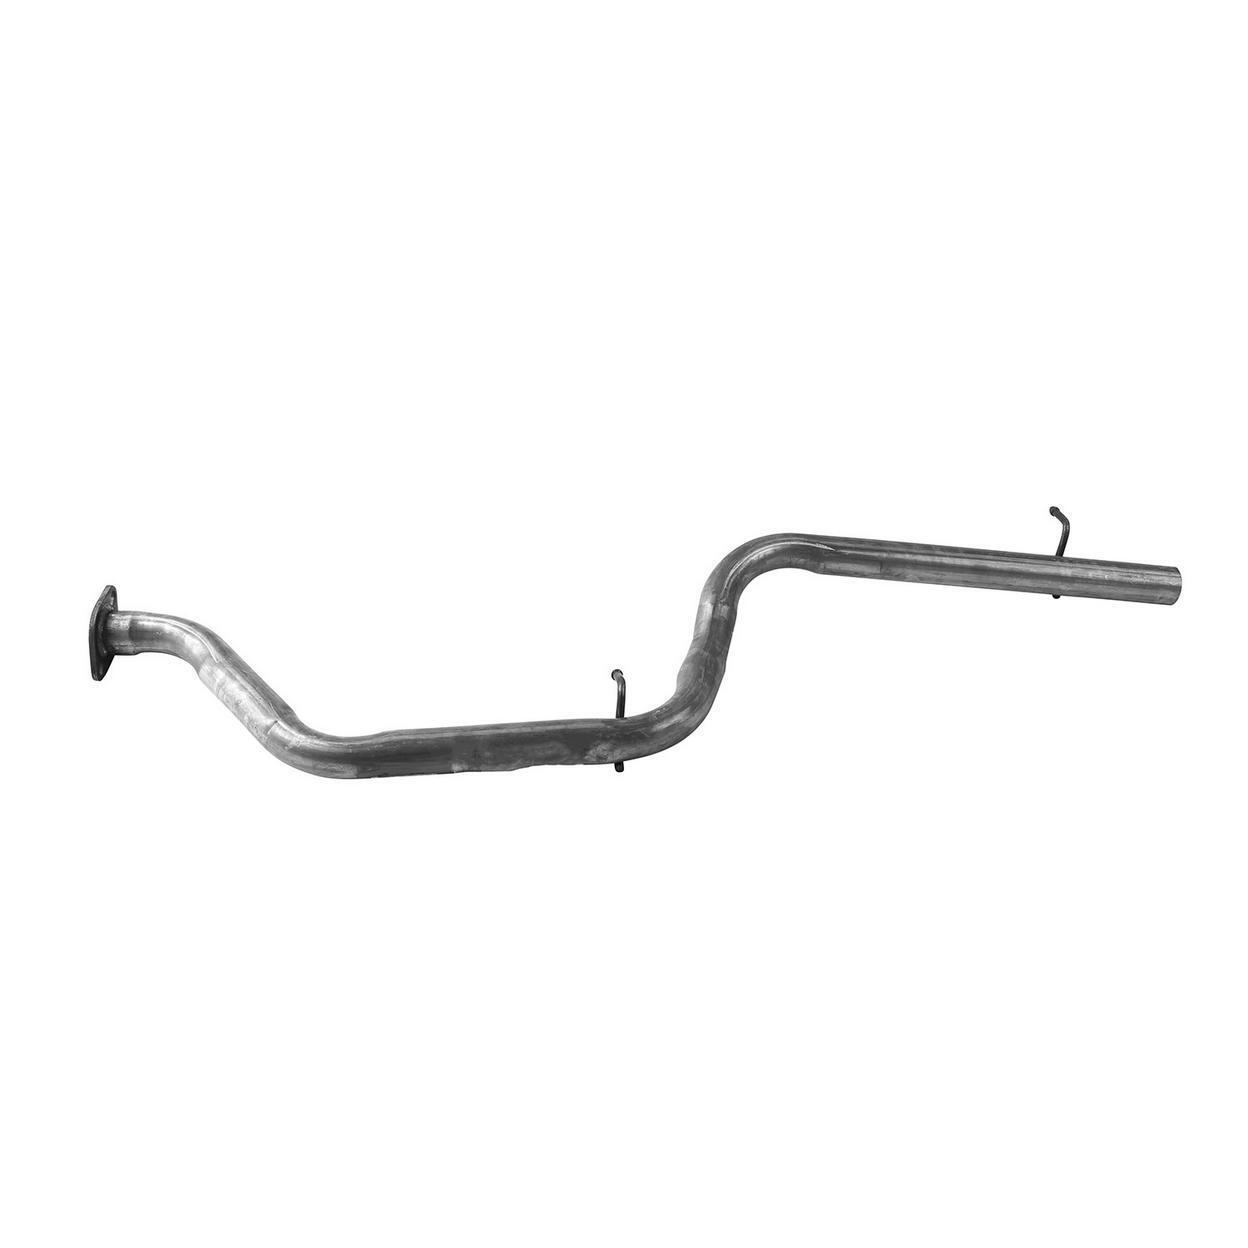 Exhaust Tail Pipe for 1996-1998 Honda Odyssey